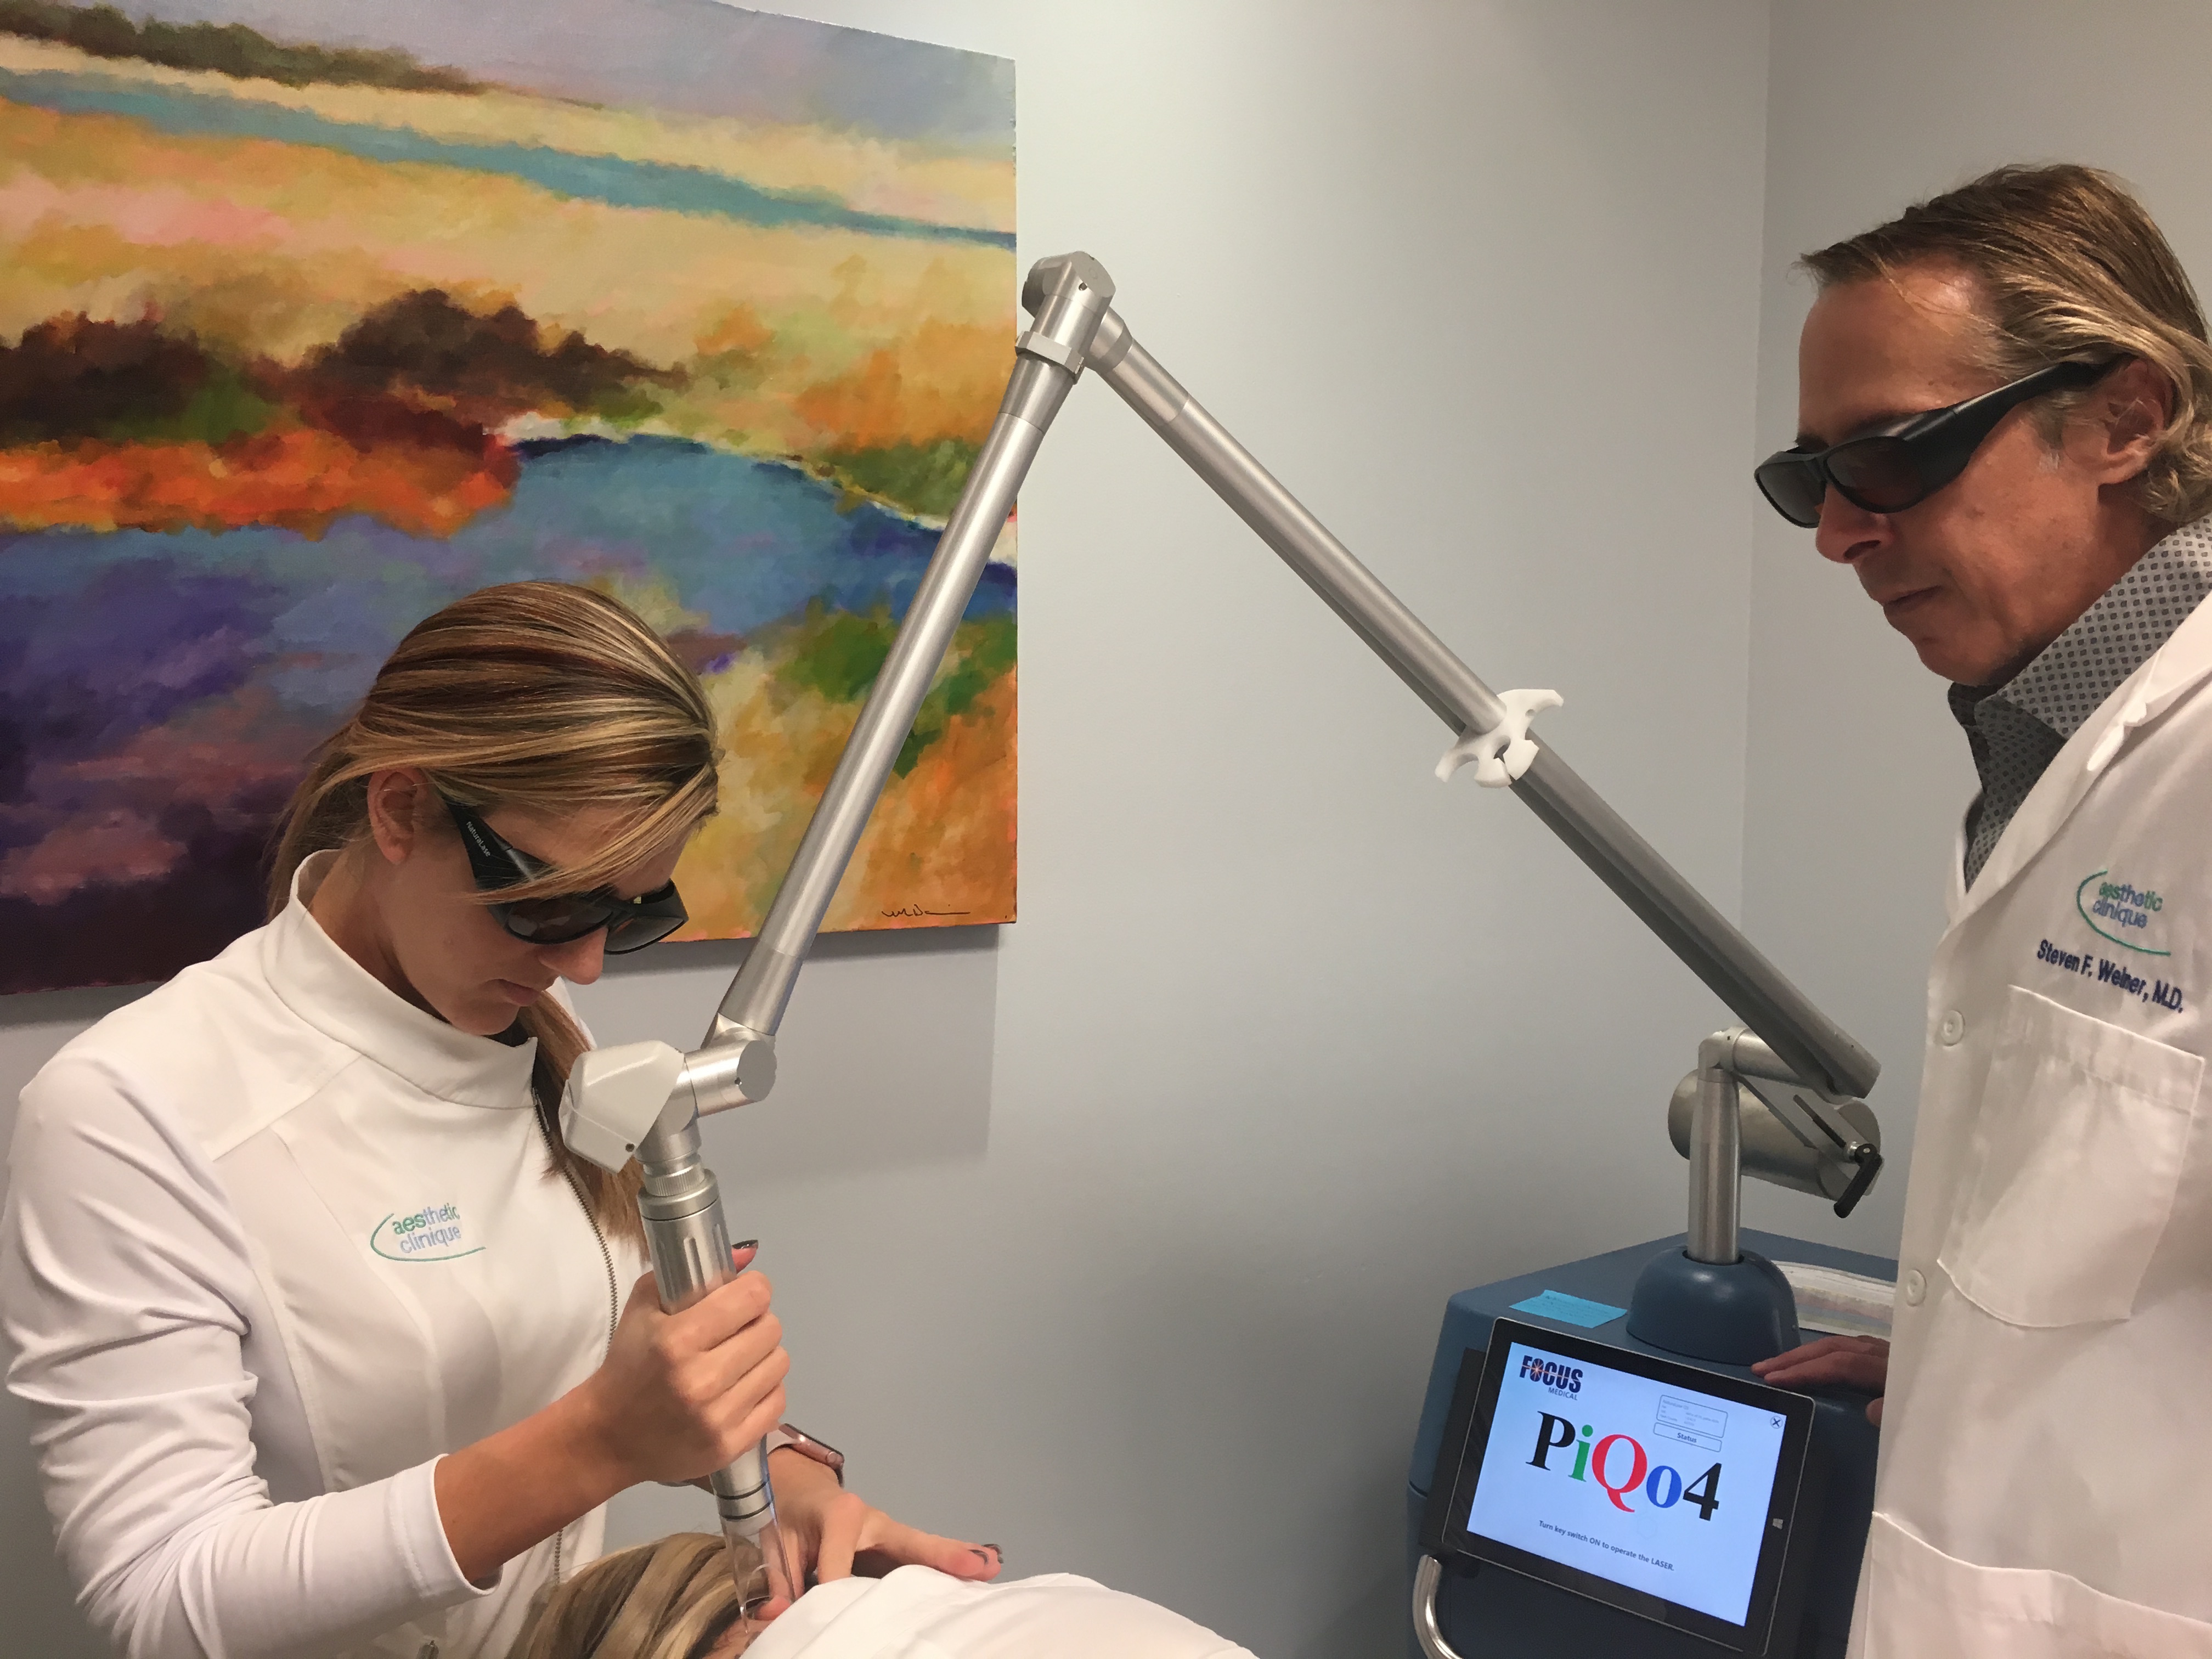 The PiQo4 in action at The Aesthetic Clinique